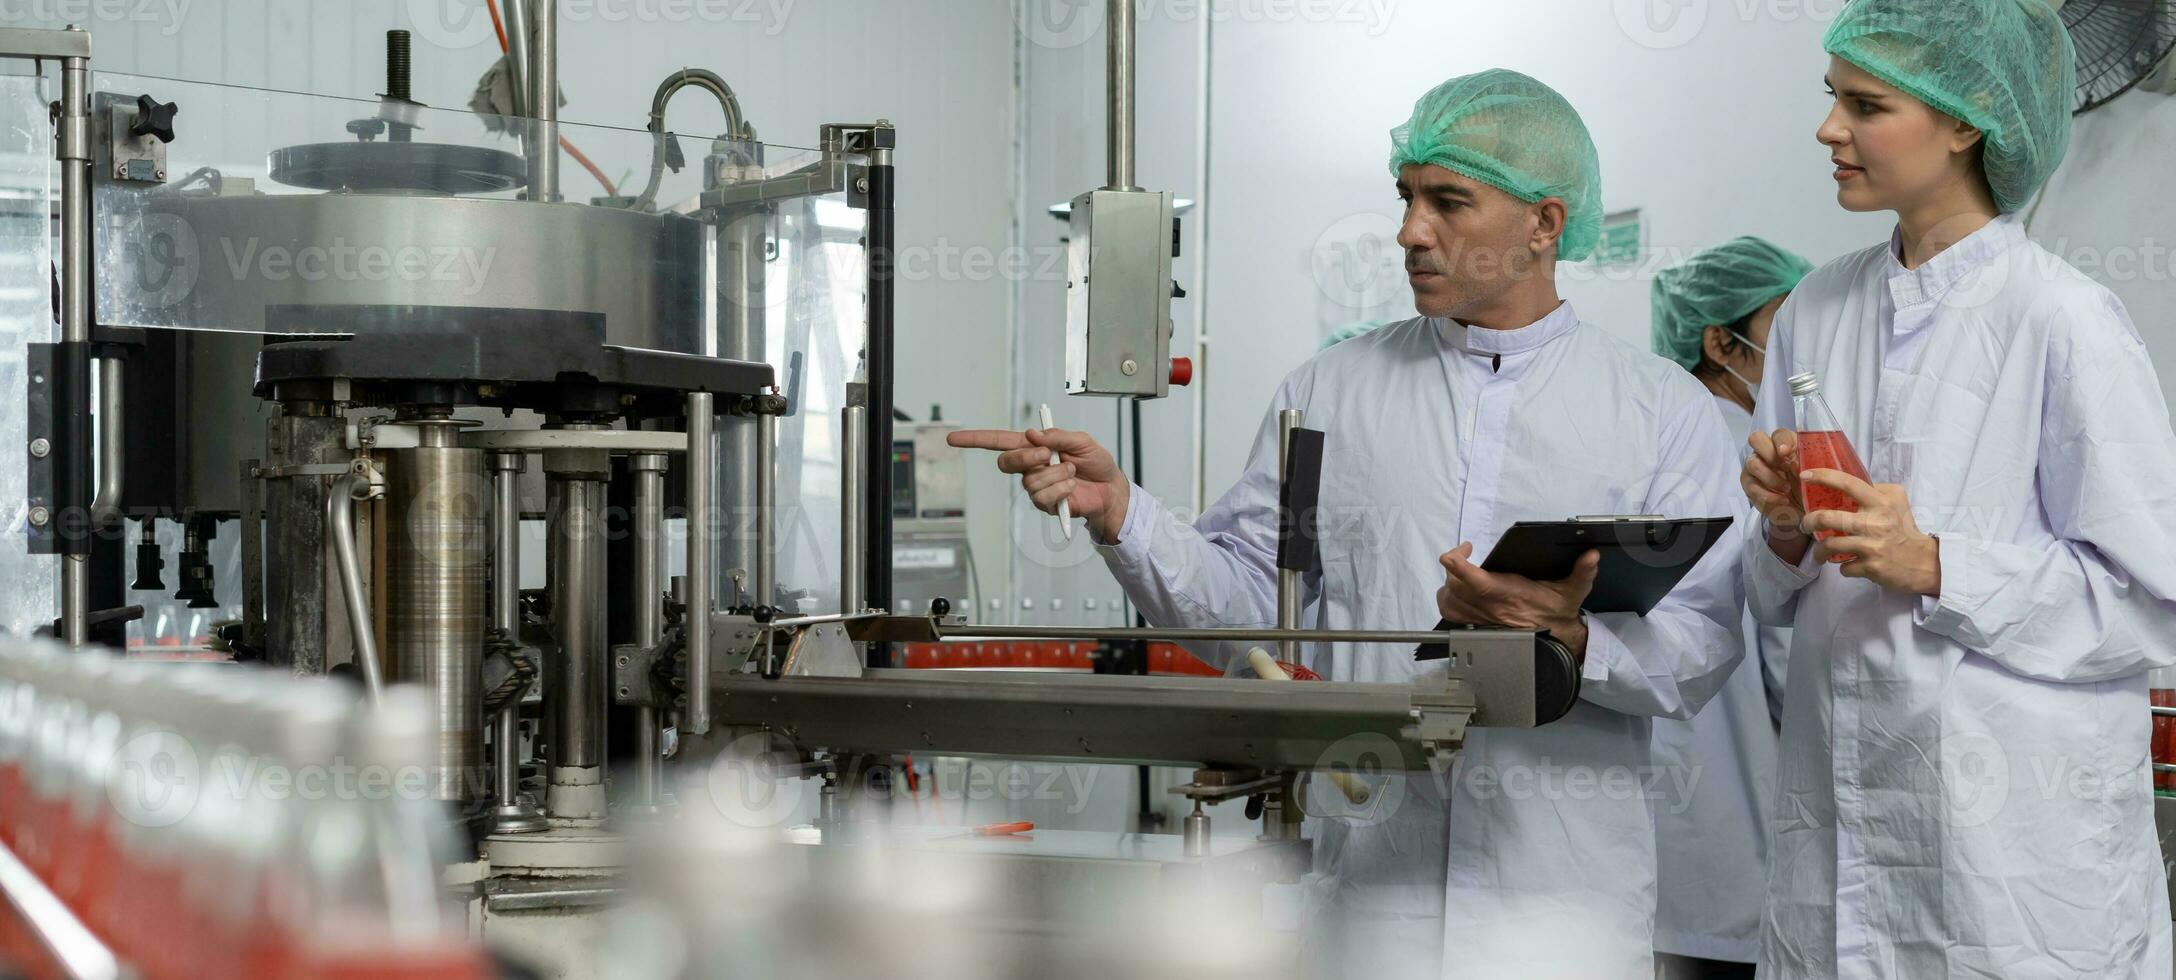 Portrait quality supervisor or food or beverages technician inspection about quality control food or beverages before send product to the customer. Production leader recheck ingredient photo